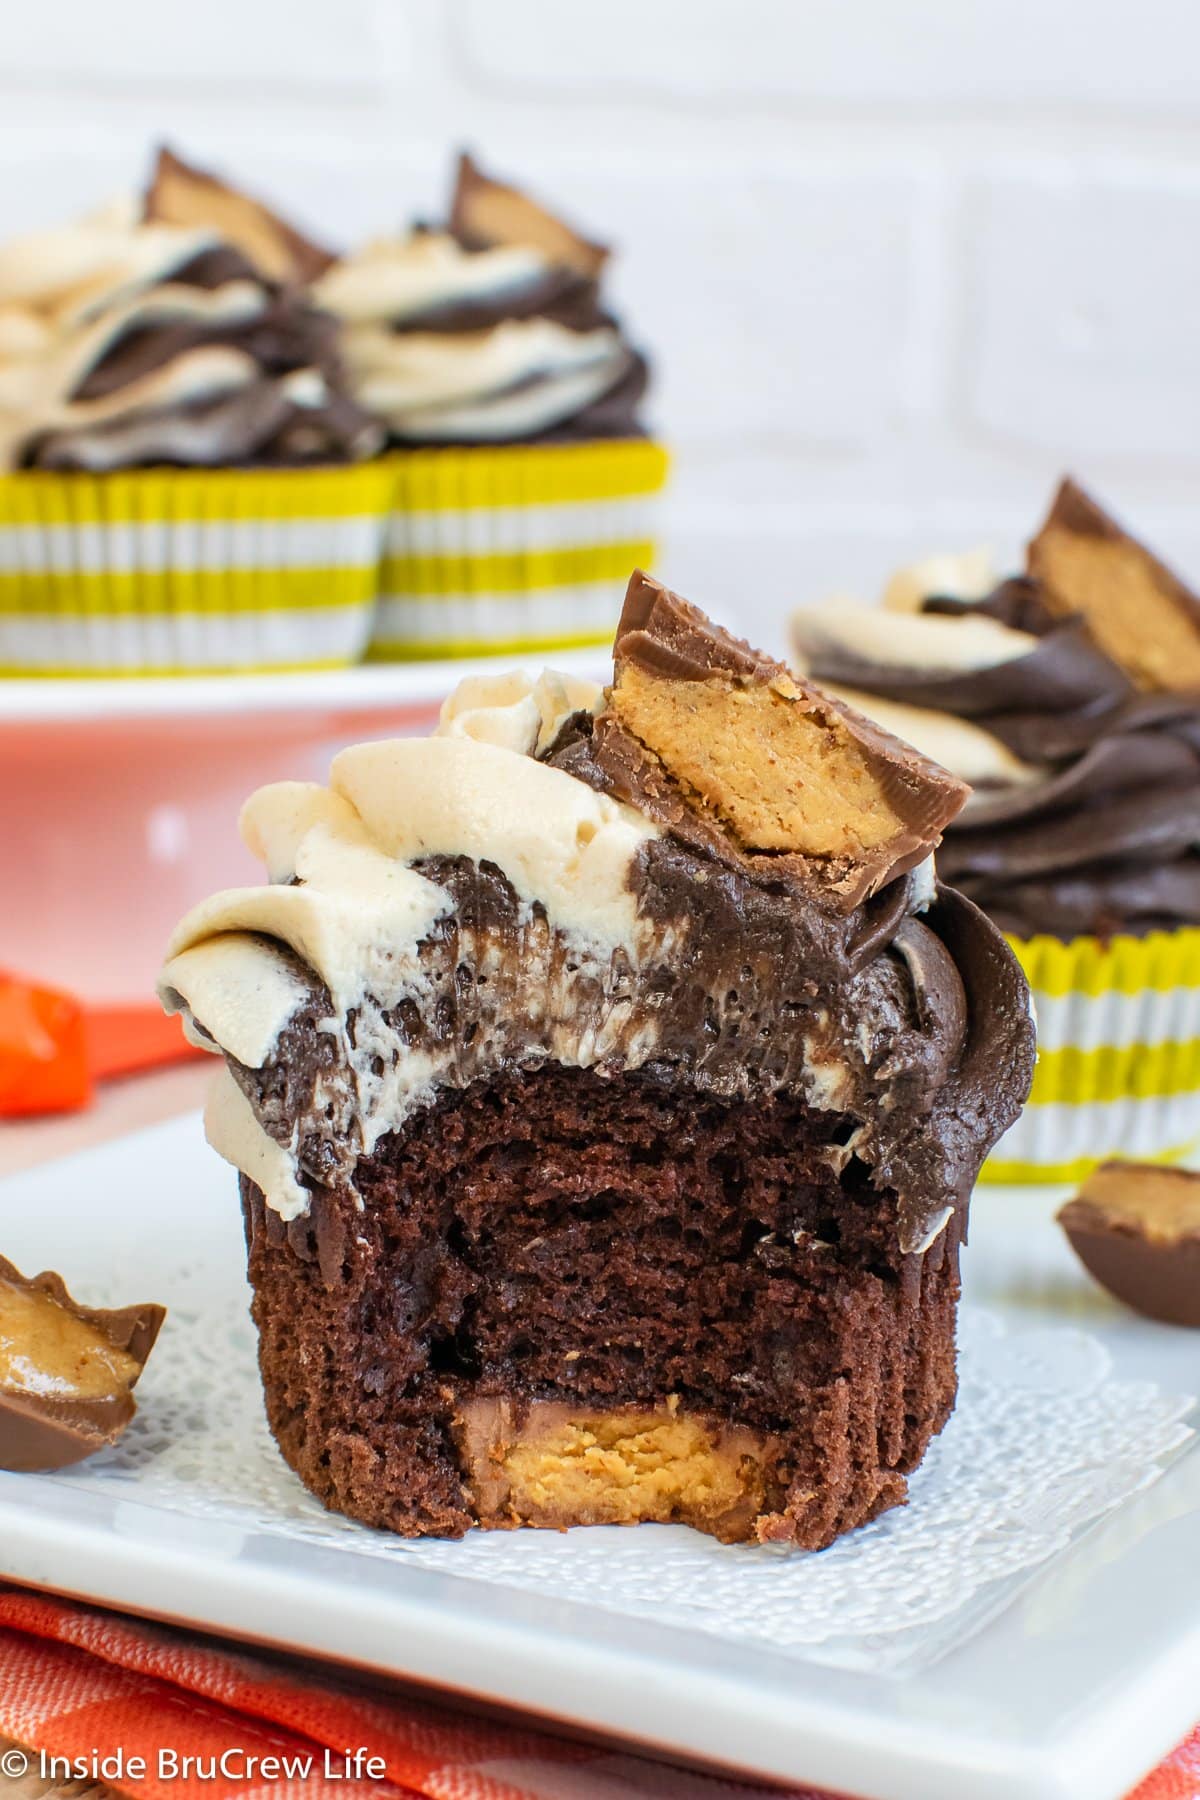 Frosted chocolate cupcakes with hidden peanut butter cups.